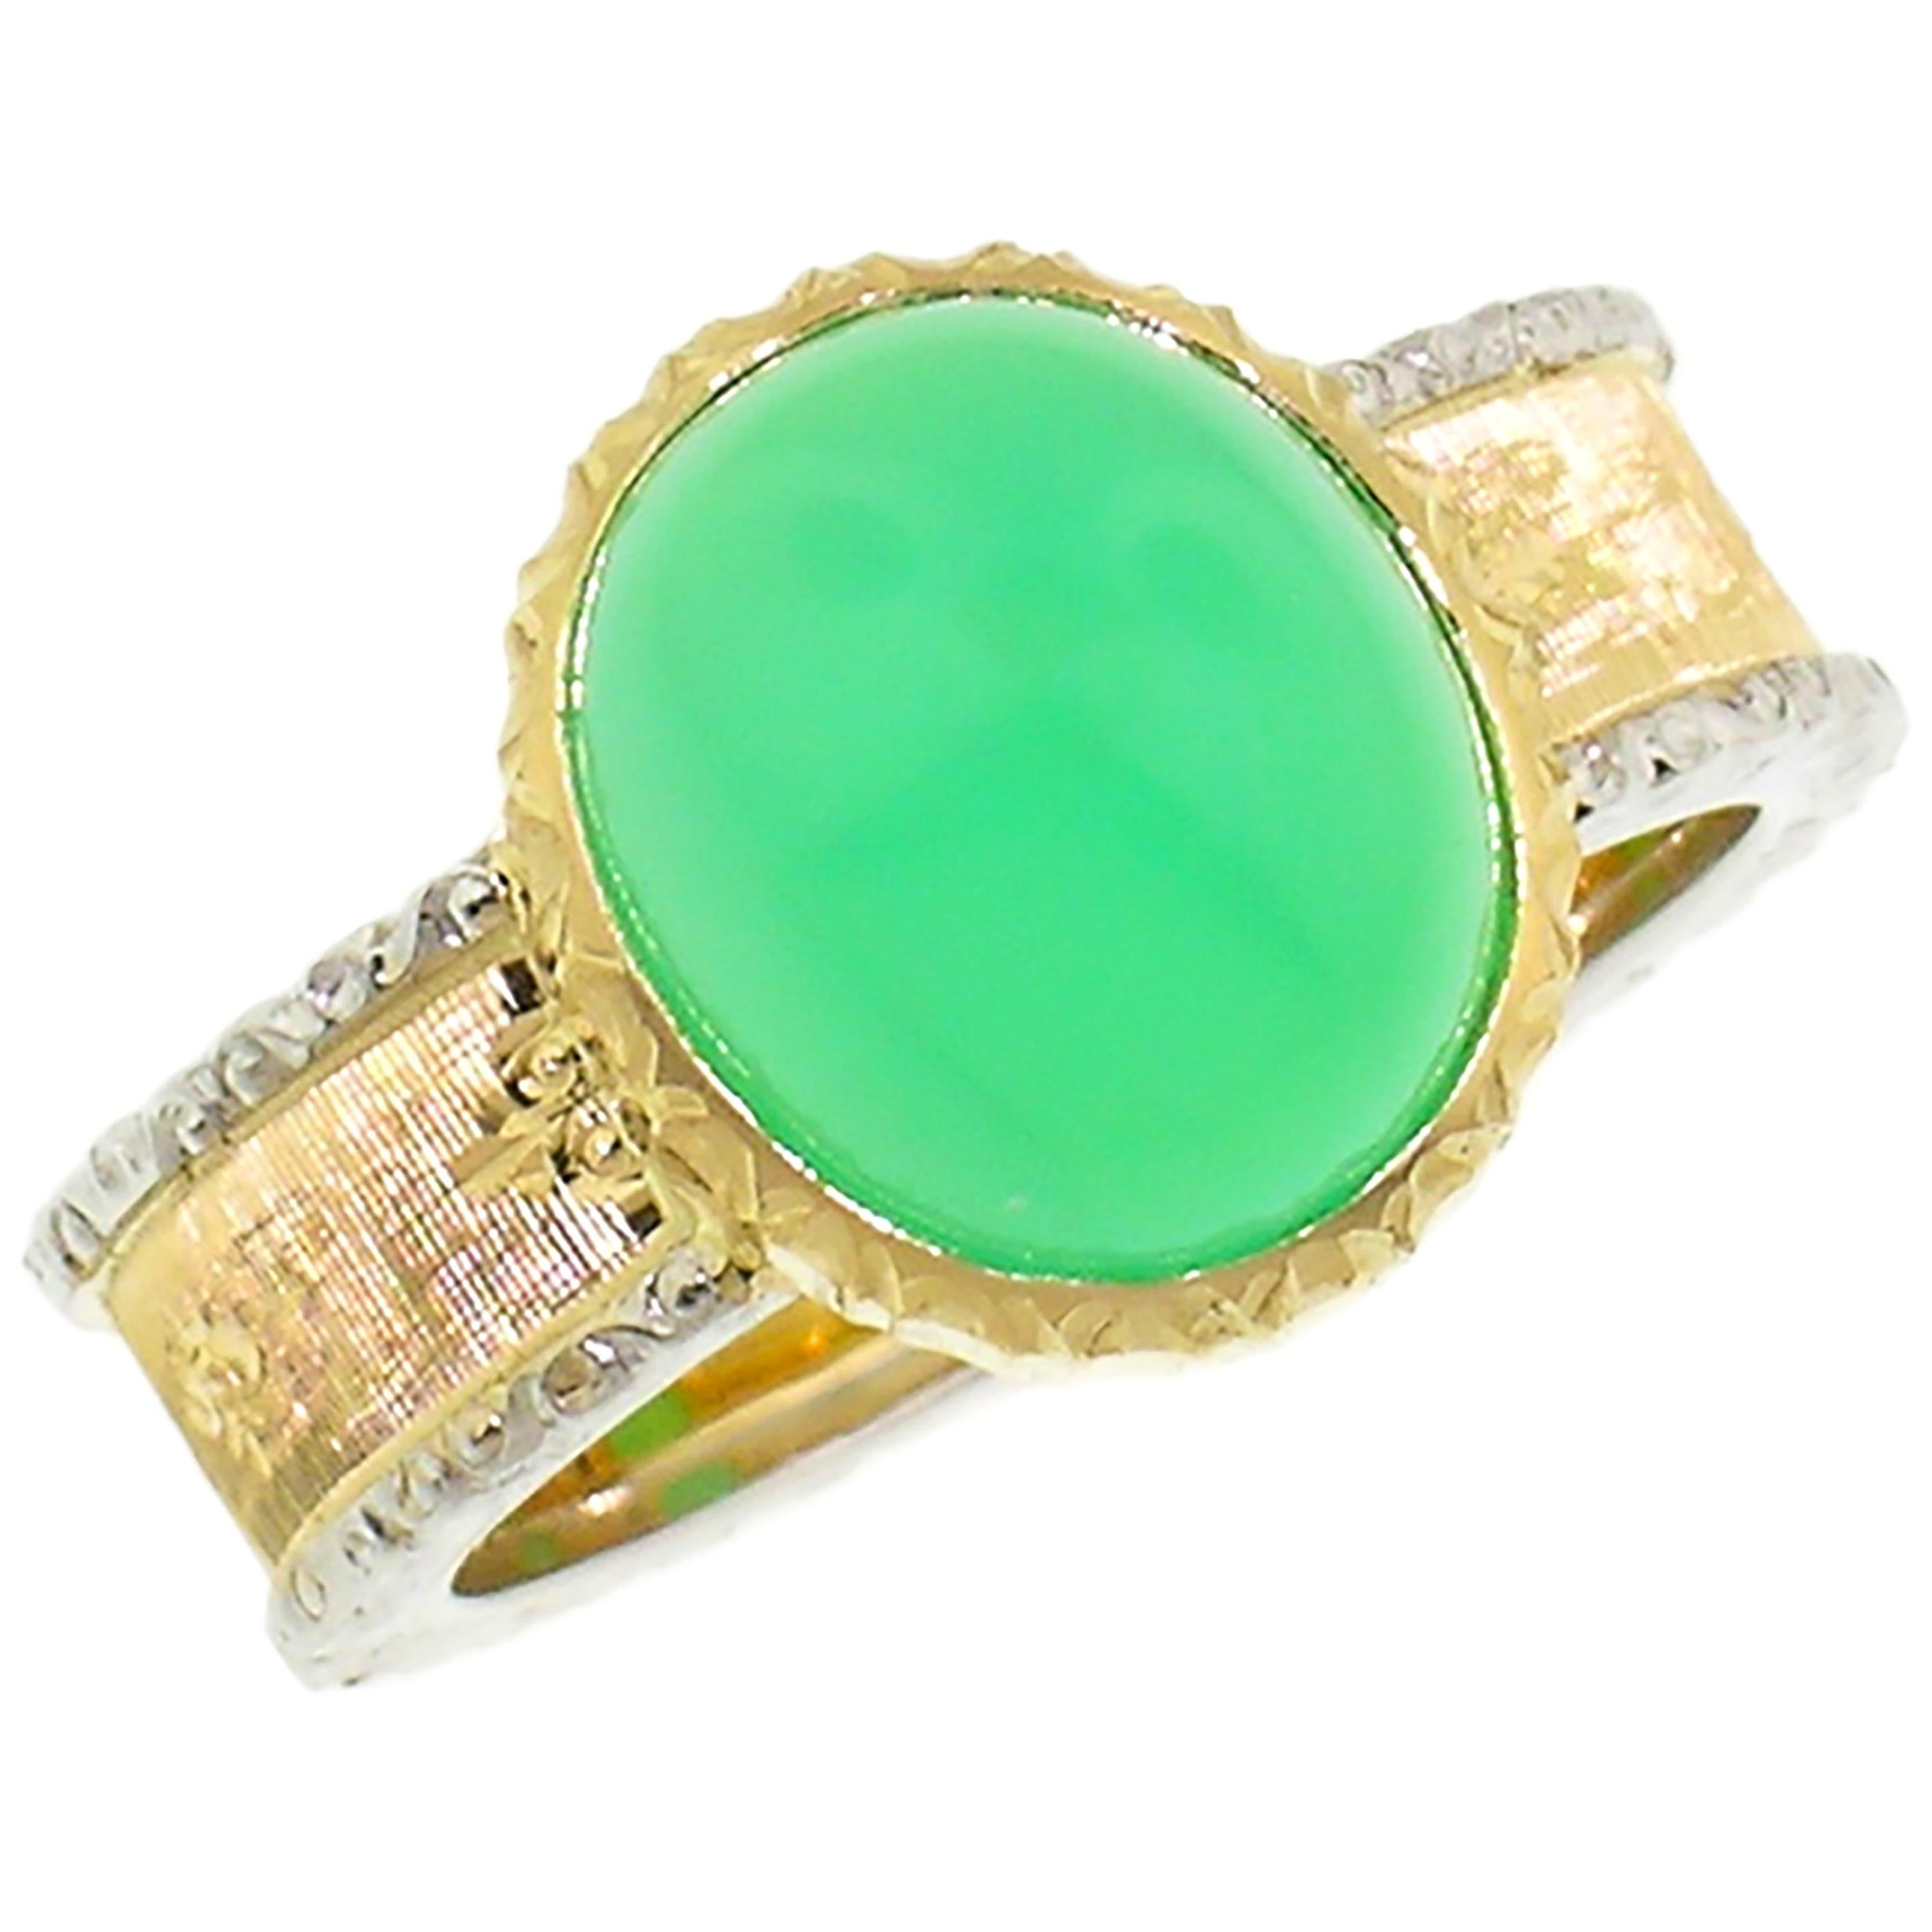 Cynthia Scott 18kt Hand Engraved Ring with Australian Chrysoprase, Made in Italy